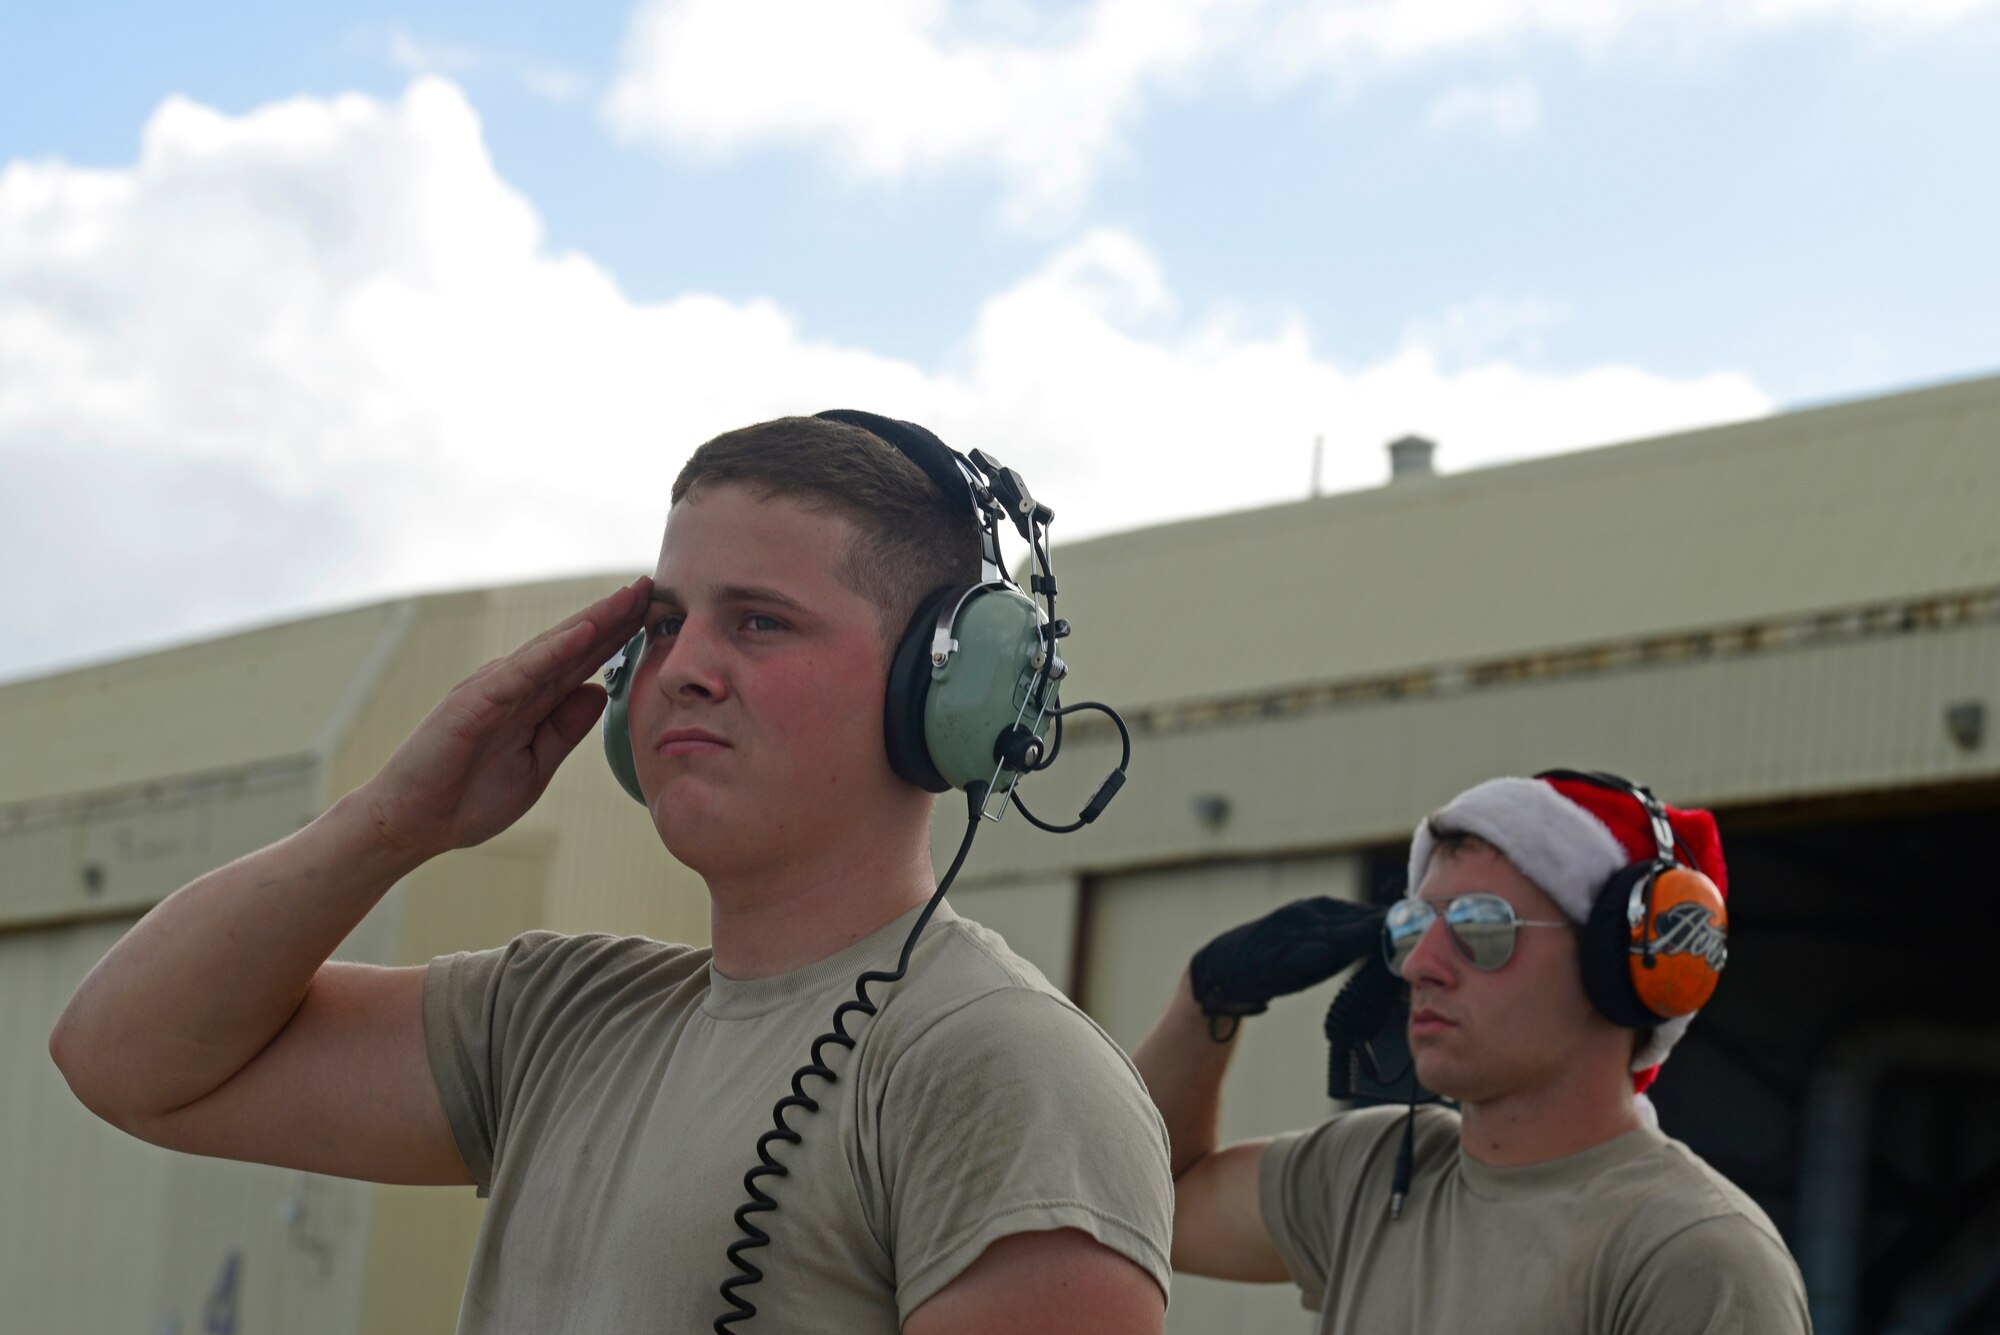 Airman 1st Class Nathan Judd (left), an electrical and environmental specialist , and Airman 1st Class Stephen Strapp, a crew chief, both assigned to the 374th Aircraft Maintenance Squadron, Yokota Air Base, Japan, salute a C-130H aircraft as it taxis before an airdrop mission during Operation Christmas Drop at Andersen Air Force Base, Guam, Dec. 11, 2013. This year marks the 62nd year of Operation Christmas Drop, which began in 1952, making it the world's longest running airdrop mission. Every December, C-130 Hercules crews from the 374th Airlift Wing at Yokota Air Base, Japan, partner with the 36th Wing at Andersen Air Force Base, Guam, to airlift food, supplies and toys to islanders throughout Micronesia. (U.S. Air Force photo by 2nd Lt. Jake Bailey/Released)